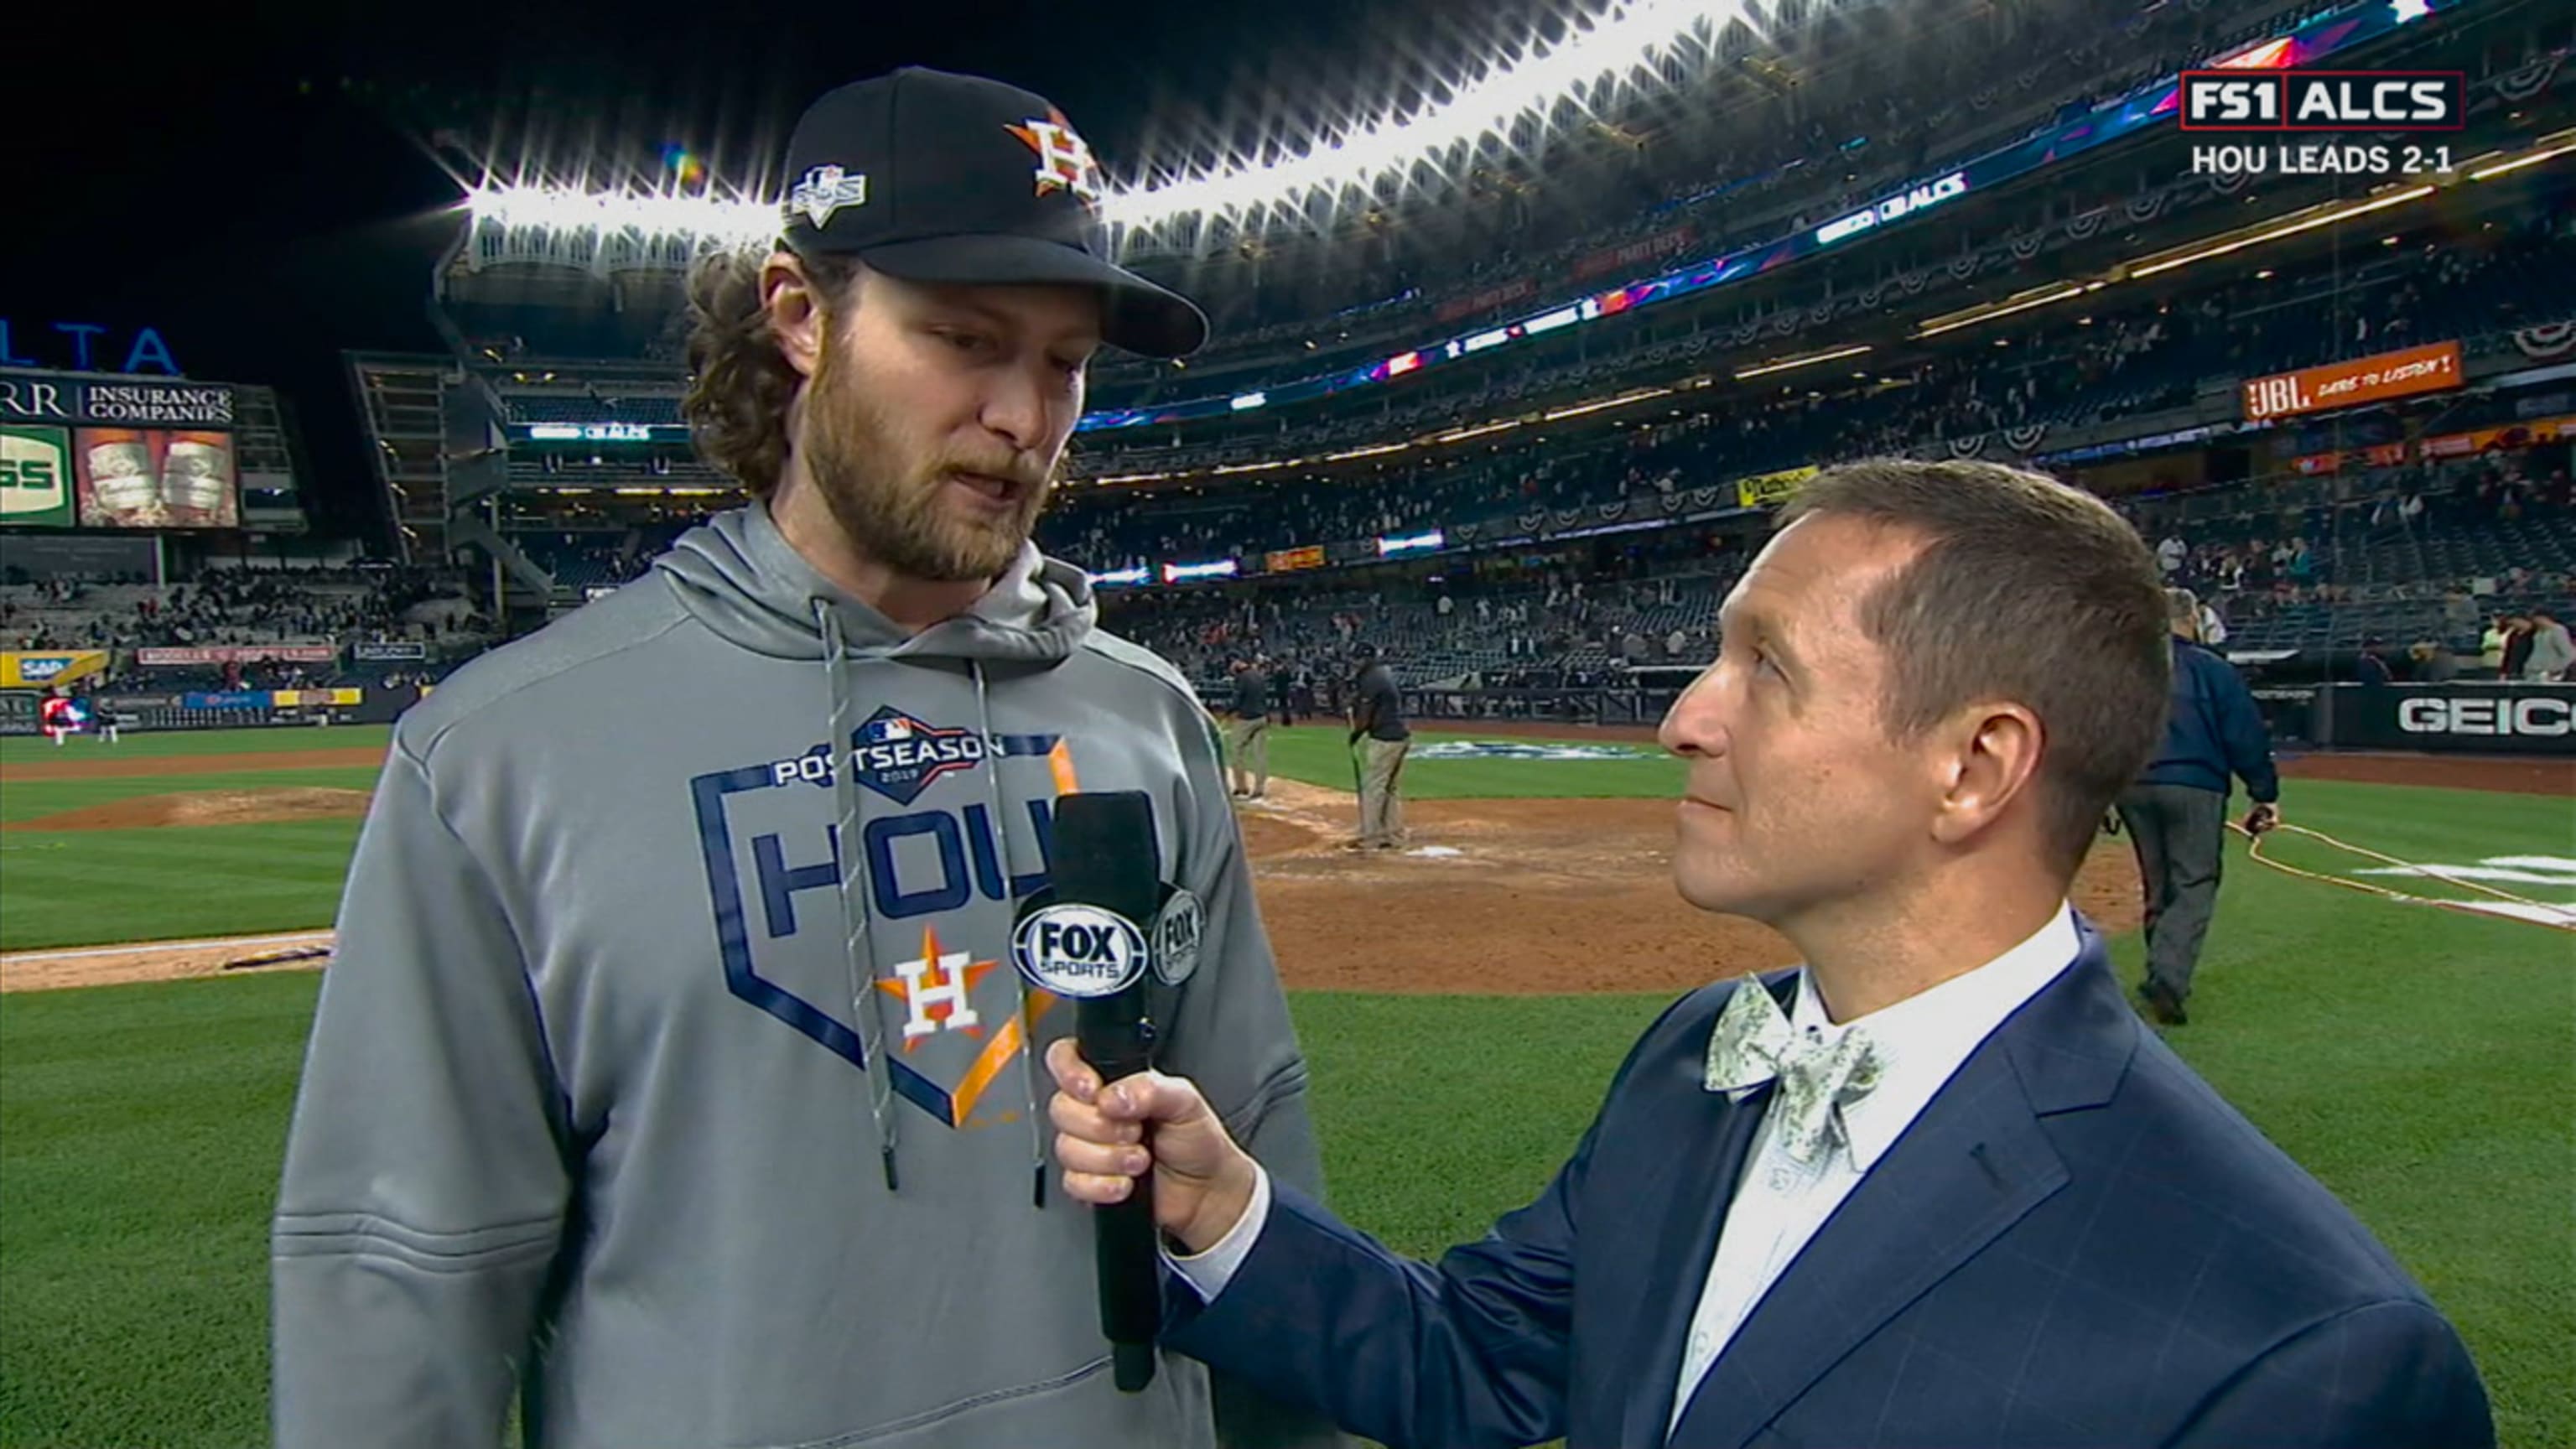 Gerrit Cole: Astros beat Yankees in Game 3 of the ALCS - Sports Illustrated